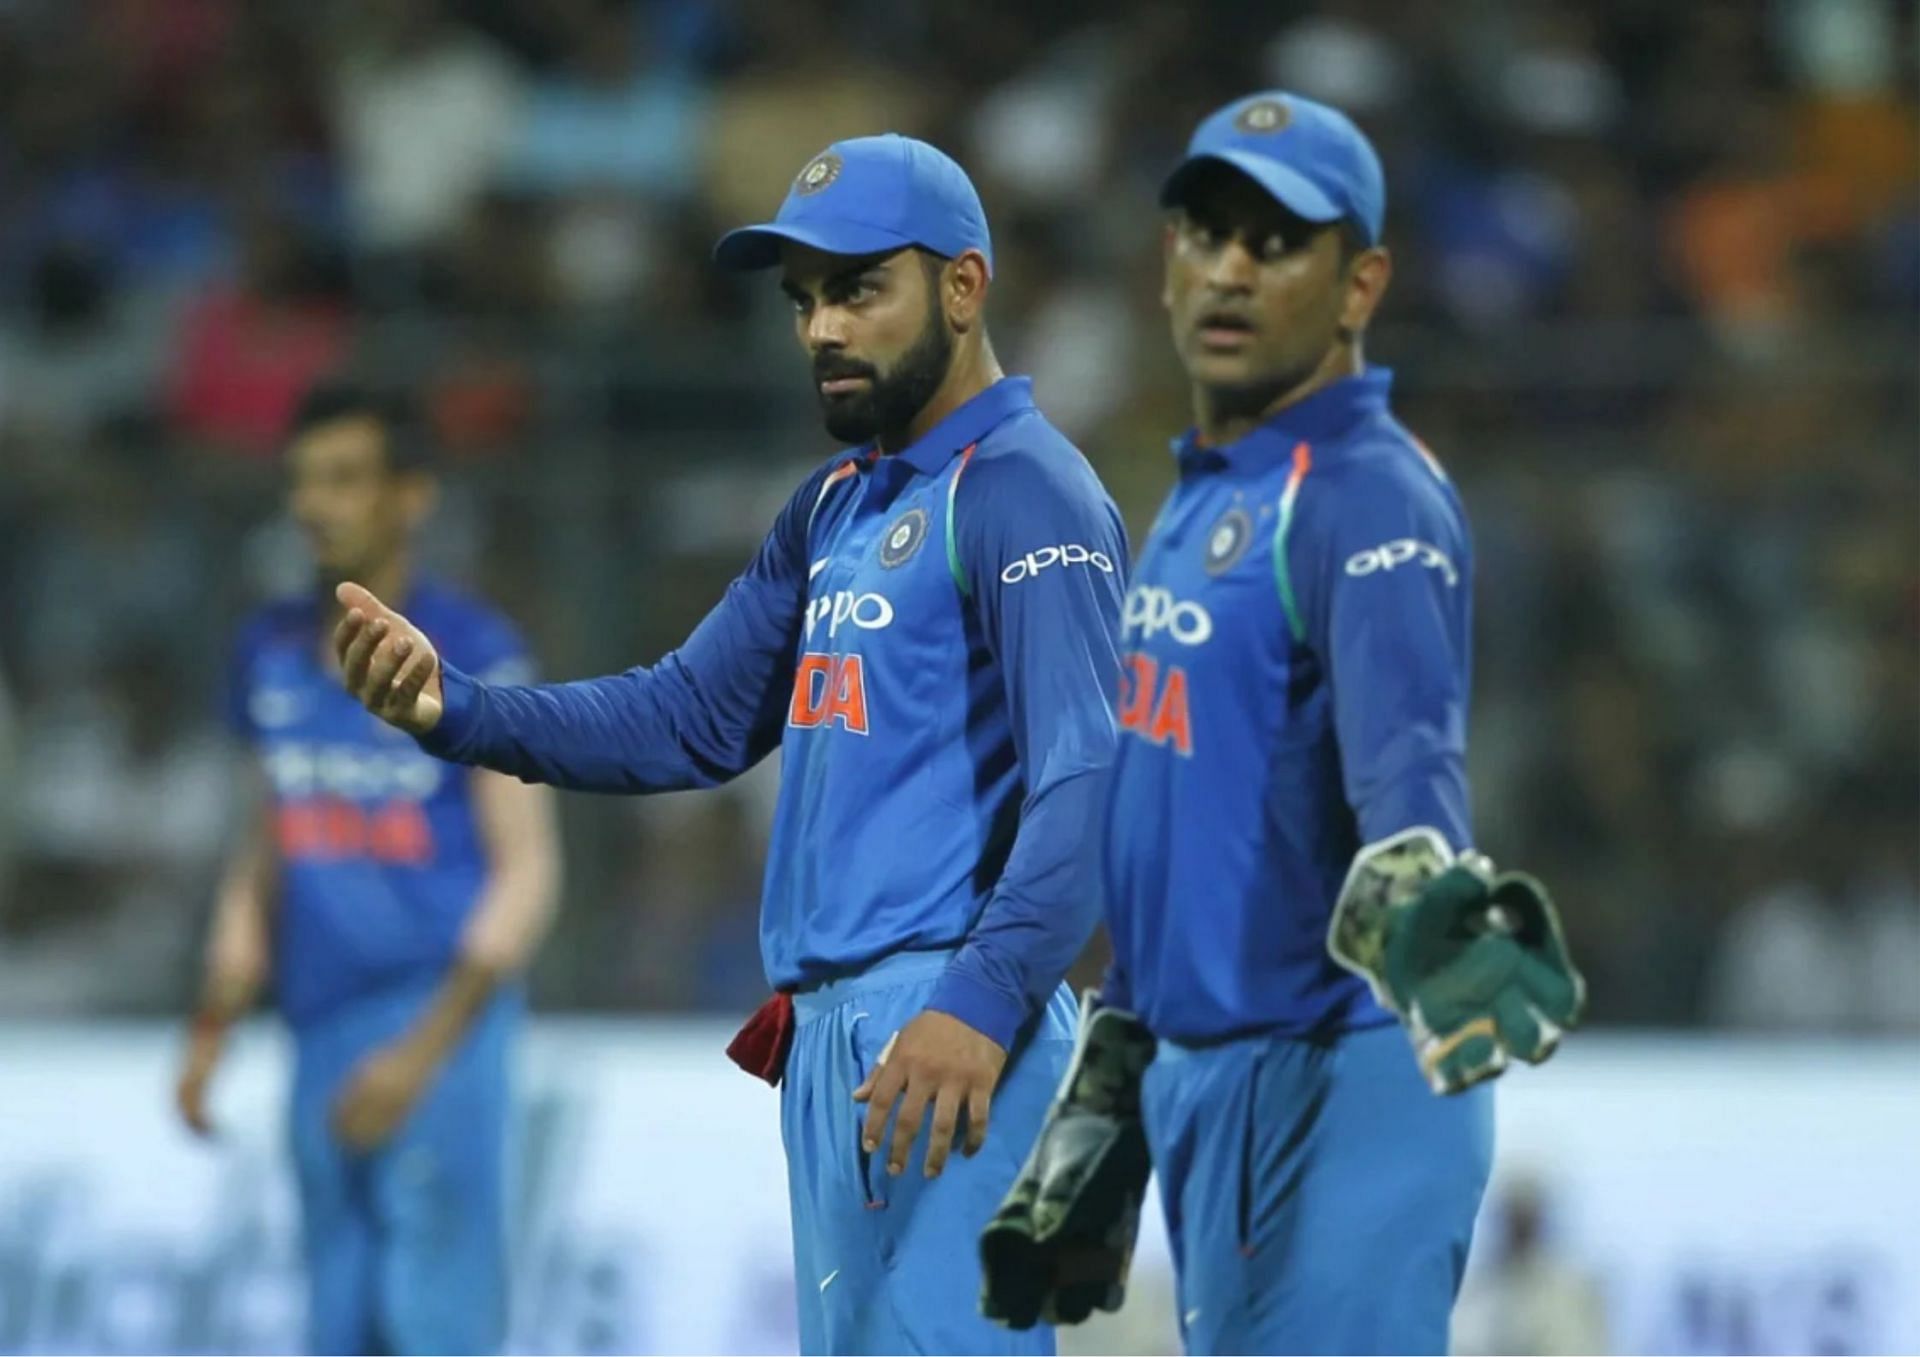 Virat Kohli and MS Dhoni both featured the last time India faced New Zealand in Mumbai (Picture Credits: BCCI).